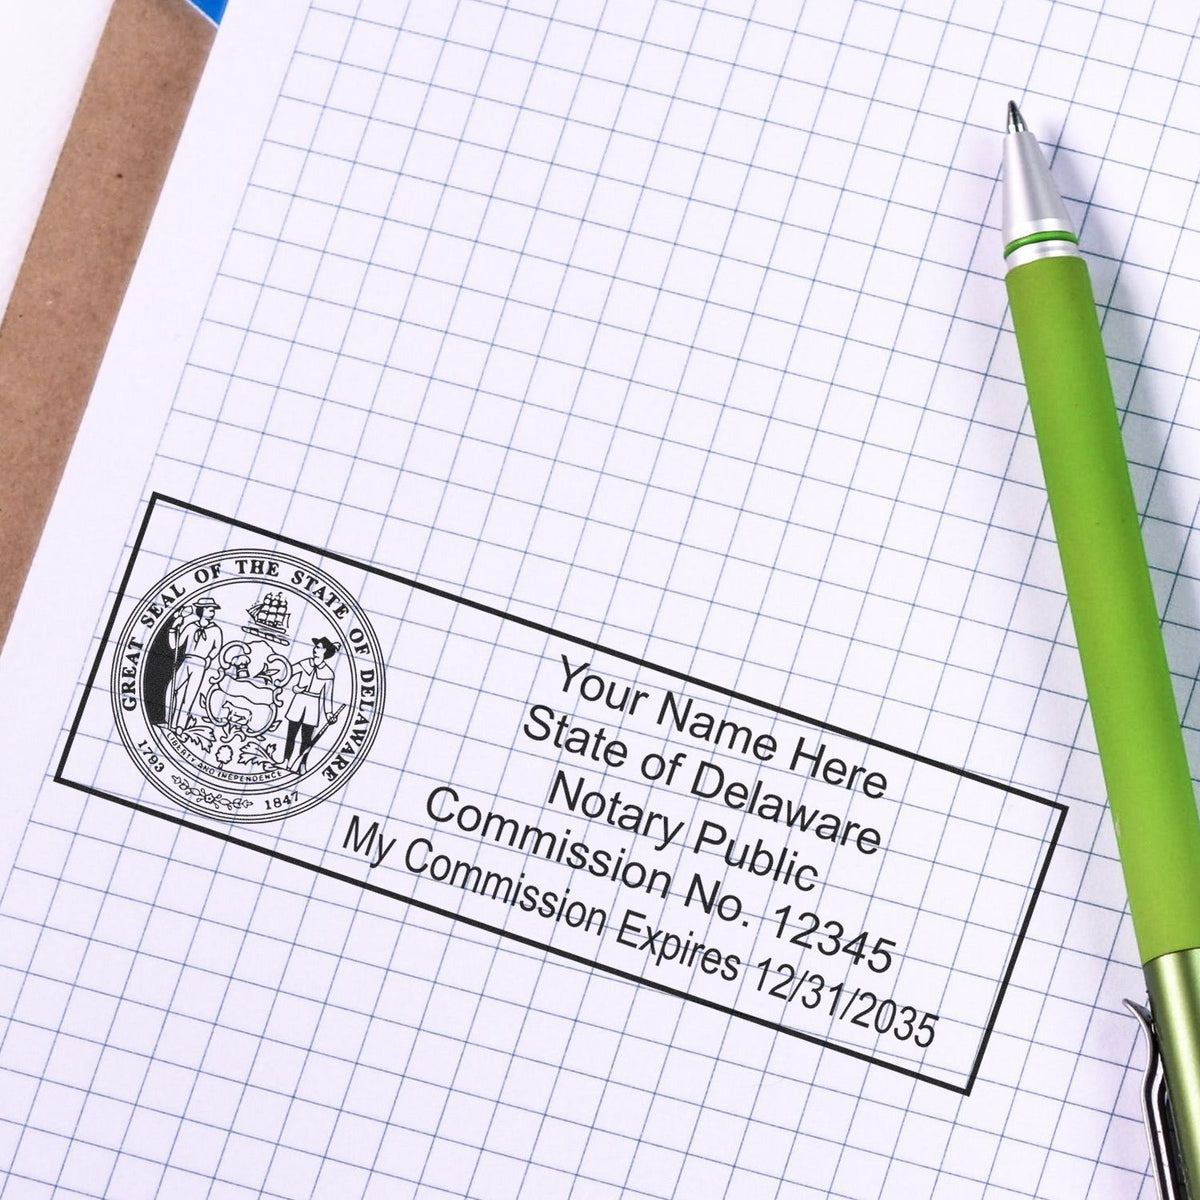 This paper is stamped with a sample imprint of the Super Slim Delaware Notary Public Stamp, signifying its quality and reliability.